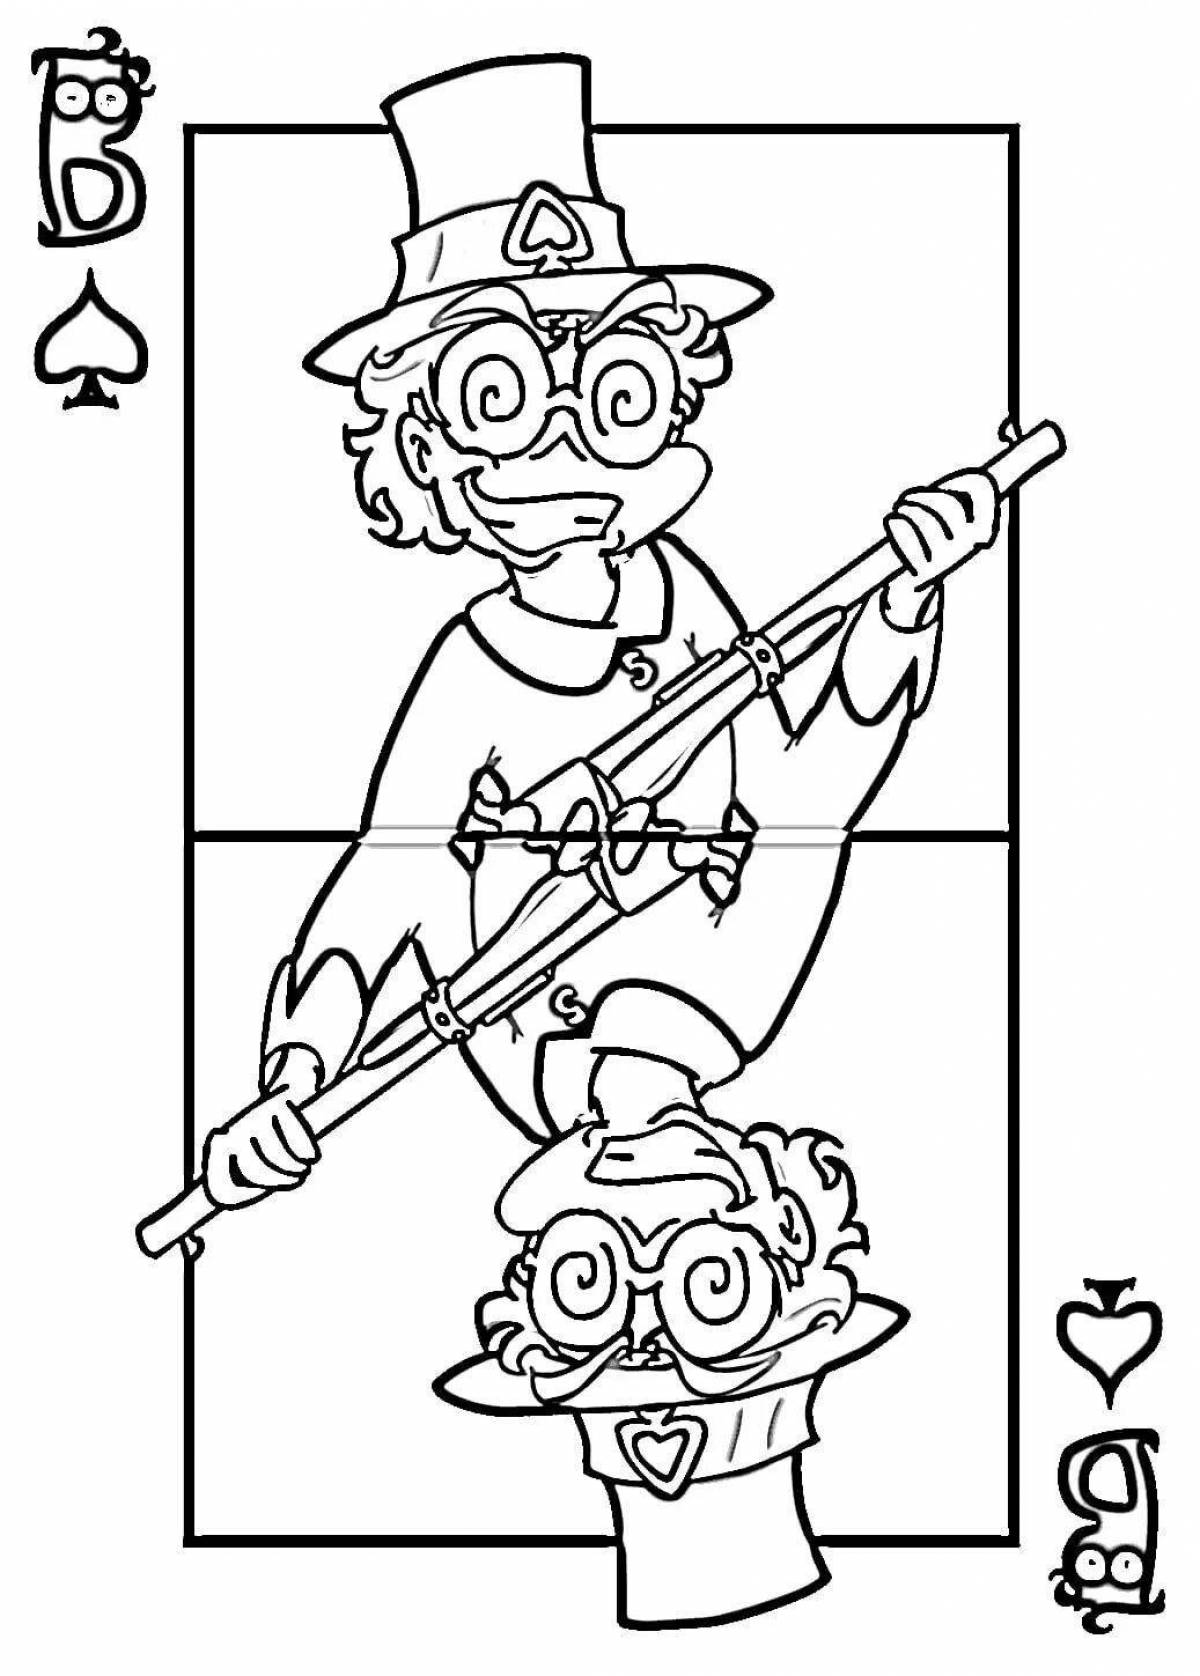 Merry Dante 13 coloring cards